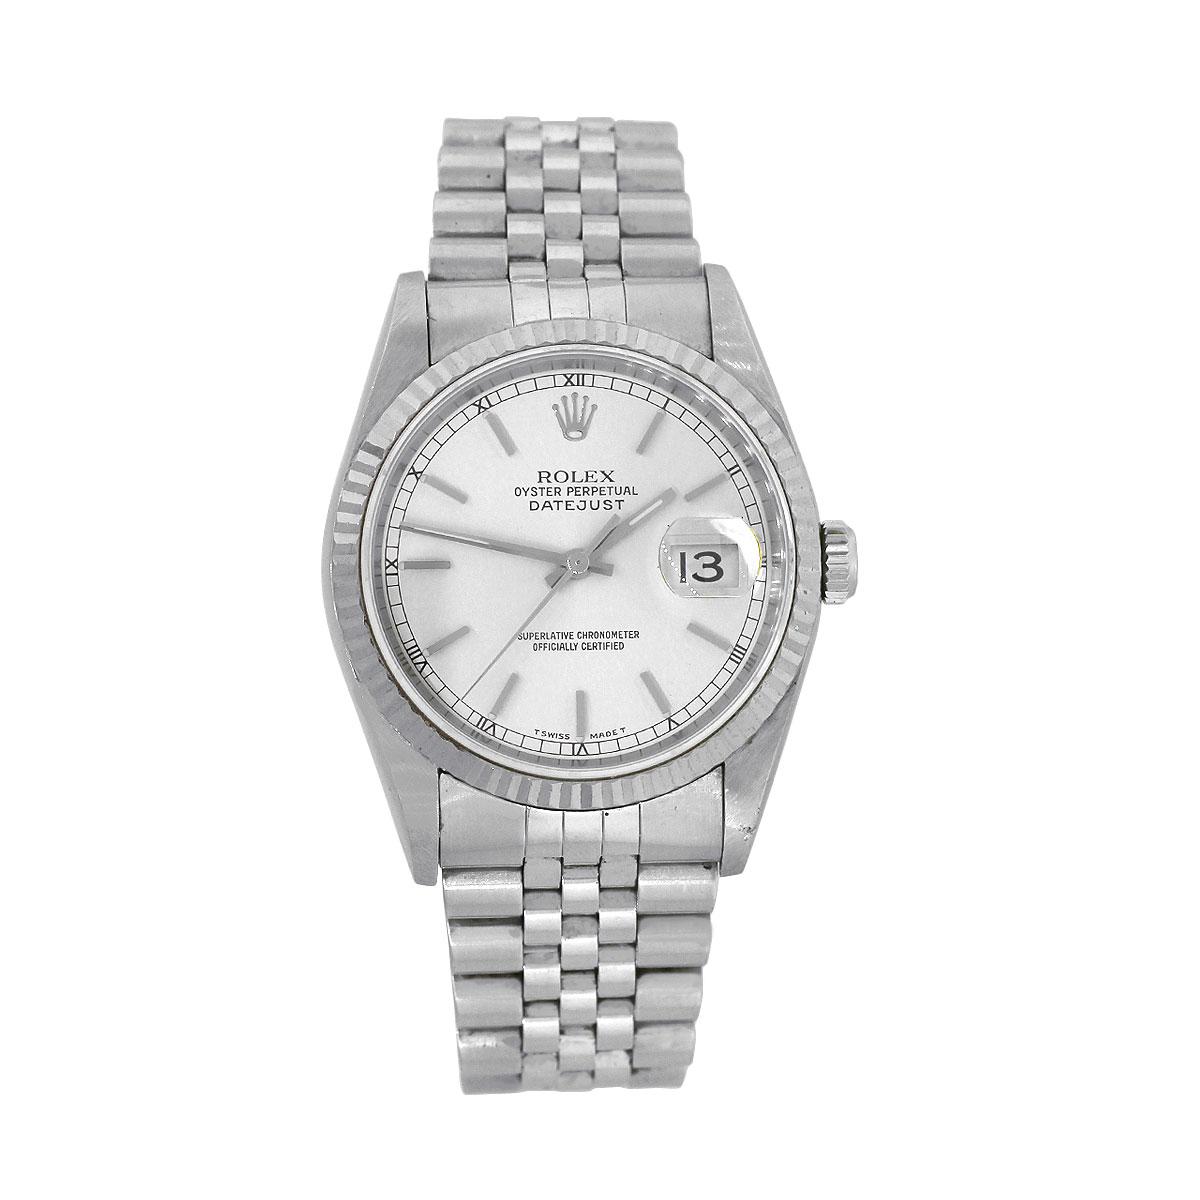 Brand: Rolex
MPN: 16234
Serial: “U” serial
Model: datejust
Case Material: Stainless steel
Case Diameter: 36mm
Crystal: Scratch resistant sapphire
Bezel: Stainless steel fluted bezel
Dial: Silver stick dial with date window at the 3 o’clock